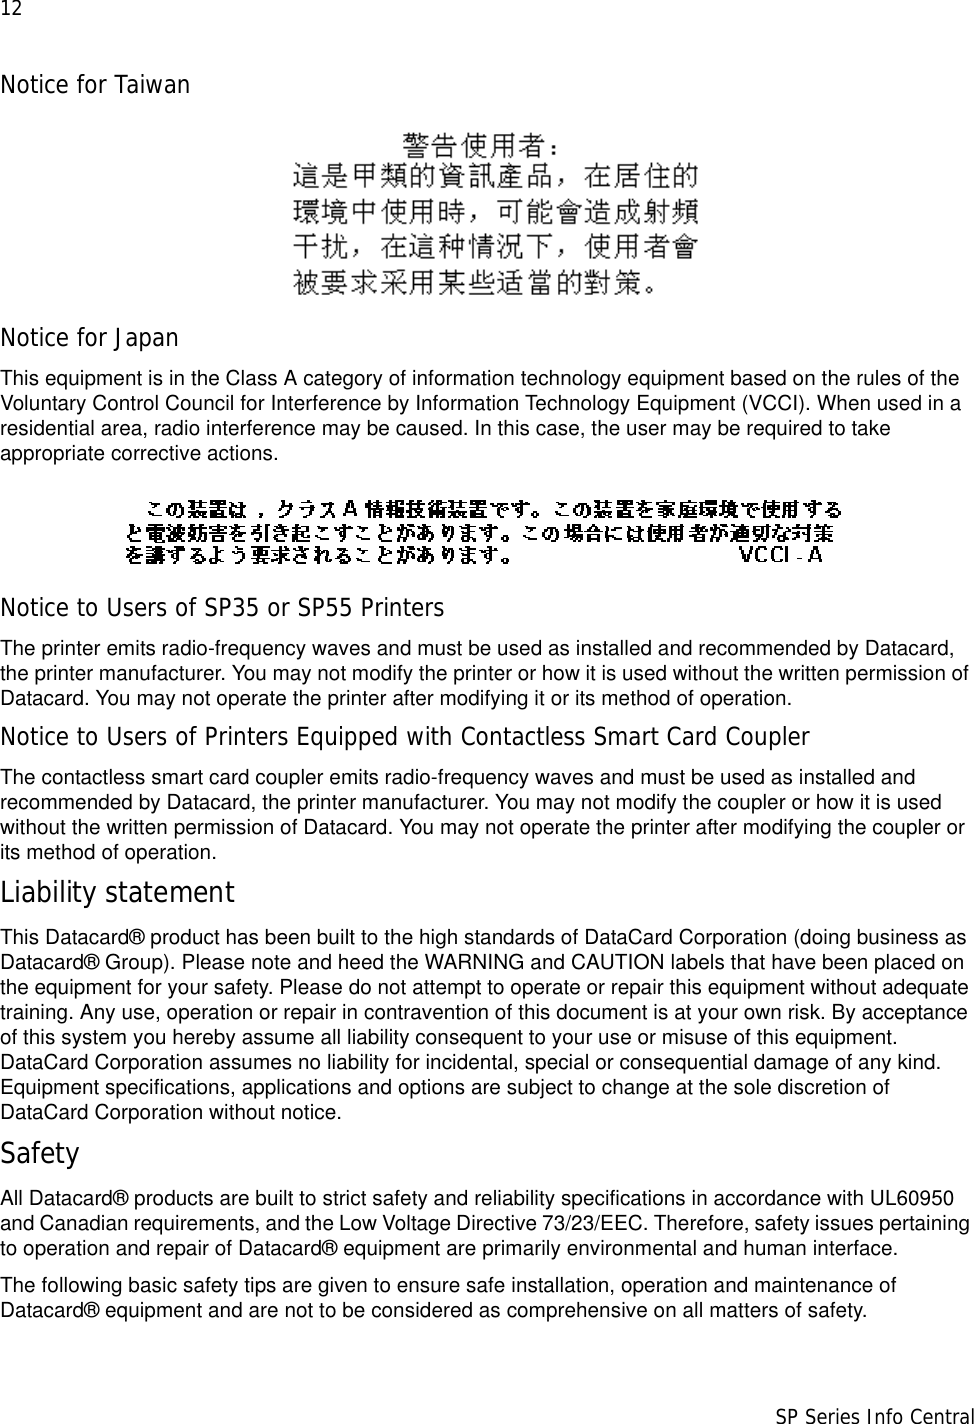 12                      SP Series Info CentralNotice for TaiwanNotice for JapanThis equipment is in the Class A category of information technology equipment based on the rules of the Voluntary Control Council for Interference by Information Technology Equipment (VCCI). When used in a residential area, radio interference may be caused. In this case, the user may be required to take appropriate corrective actions.Notice to Users of SP35 or SP55 PrintersThe printer emits radio-frequency waves and must be used as installed and recommended by Datacard, the printer manufacturer. You may not modify the printer or how it is used without the written permission of Datacard. You may not operate the printer after modifying it or its method of operation.Notice to Users of Printers Equipped with Contactless Smart Card CouplerThe contactless smart card coupler emits radio-frequency waves and must be used as installed and recommended by Datacard, the printer manufacturer. You may not modify the coupler or how it is used without the written permission of Datacard. You may not operate the printer after modifying the coupler or its method of operation.Liability statementThis Datacard® product has been built to the high standards of DataCard Corporation (doing business as Datacard® Group). Please note and heed the WARNING and CAUTION labels that have been placed on the equipment for your safety. Please do not attempt to operate or repair this equipment without adequate training. Any use, operation or repair in contravention of this document is at your own risk. By acceptance of this system you hereby assume all liability consequent to your use or misuse of this equipment. DataCard Corporation assumes no liability for incidental, special or consequential damage of any kind. Equipment specifications, applications and options are subject to change at the sole discretion of DataCard Corporation without notice.SafetyAll Datacard® products are built to strict safety and reliability specifications in accordance with UL60950 and Canadian requirements, and the Low Voltage Directive 73/23/EEC. Therefore, safety issues pertaining to operation and repair of Datacard® equipment are primarily environmental and human interface.The following basic safety tips are given to ensure safe installation, operation and maintenance of Datacard® equipment and are not to be considered as comprehensive on all matters of safety.